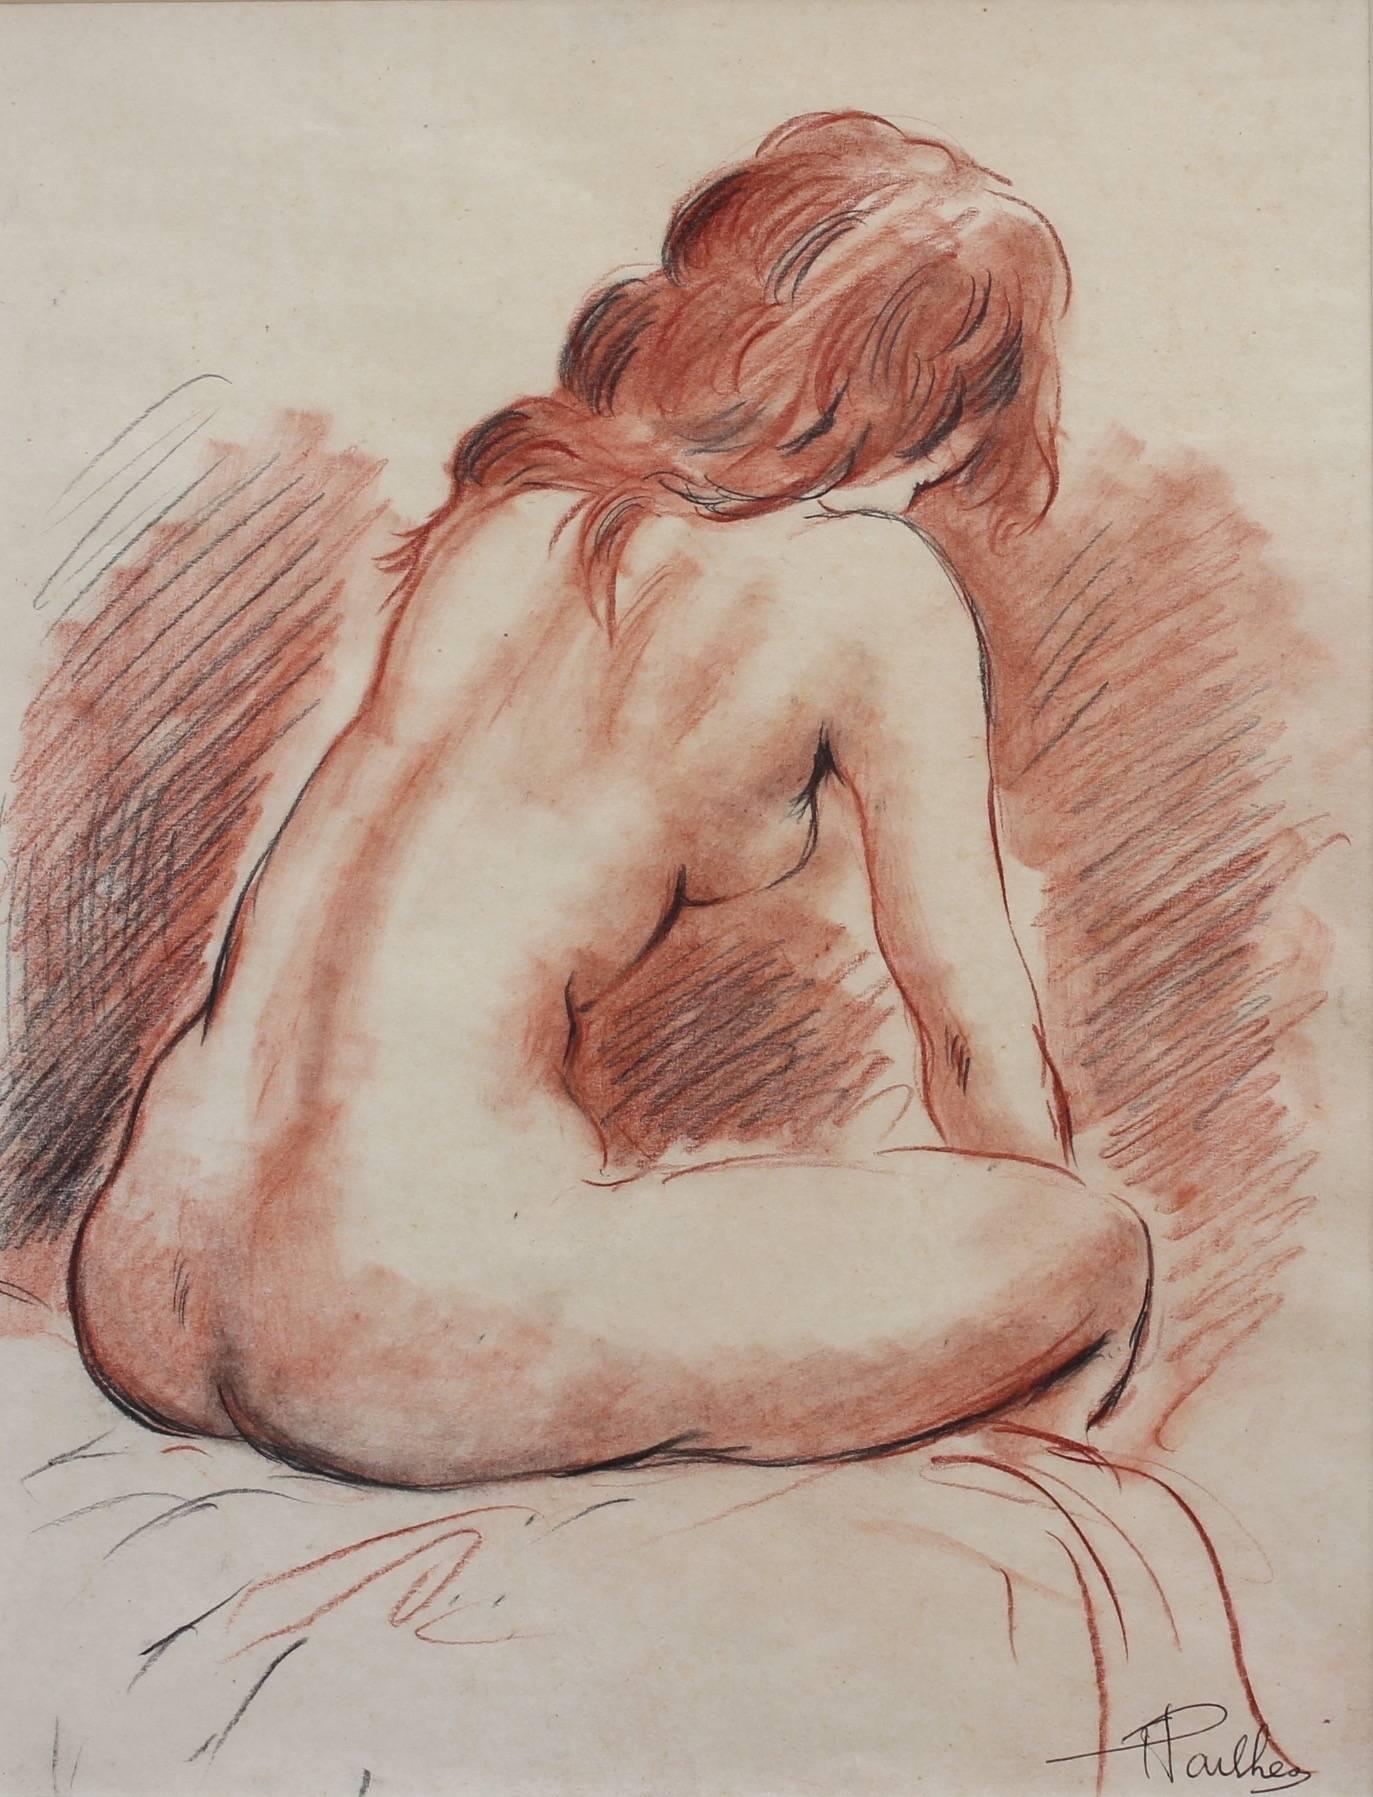 In 'Reclining Nude Young Woman' (circa 1950s), crayon and graphite on paper, Pailhès sketched this beautiful young woman reclining in bed. Although her face is not visible, the artist has captured her posture and body language which shows she is